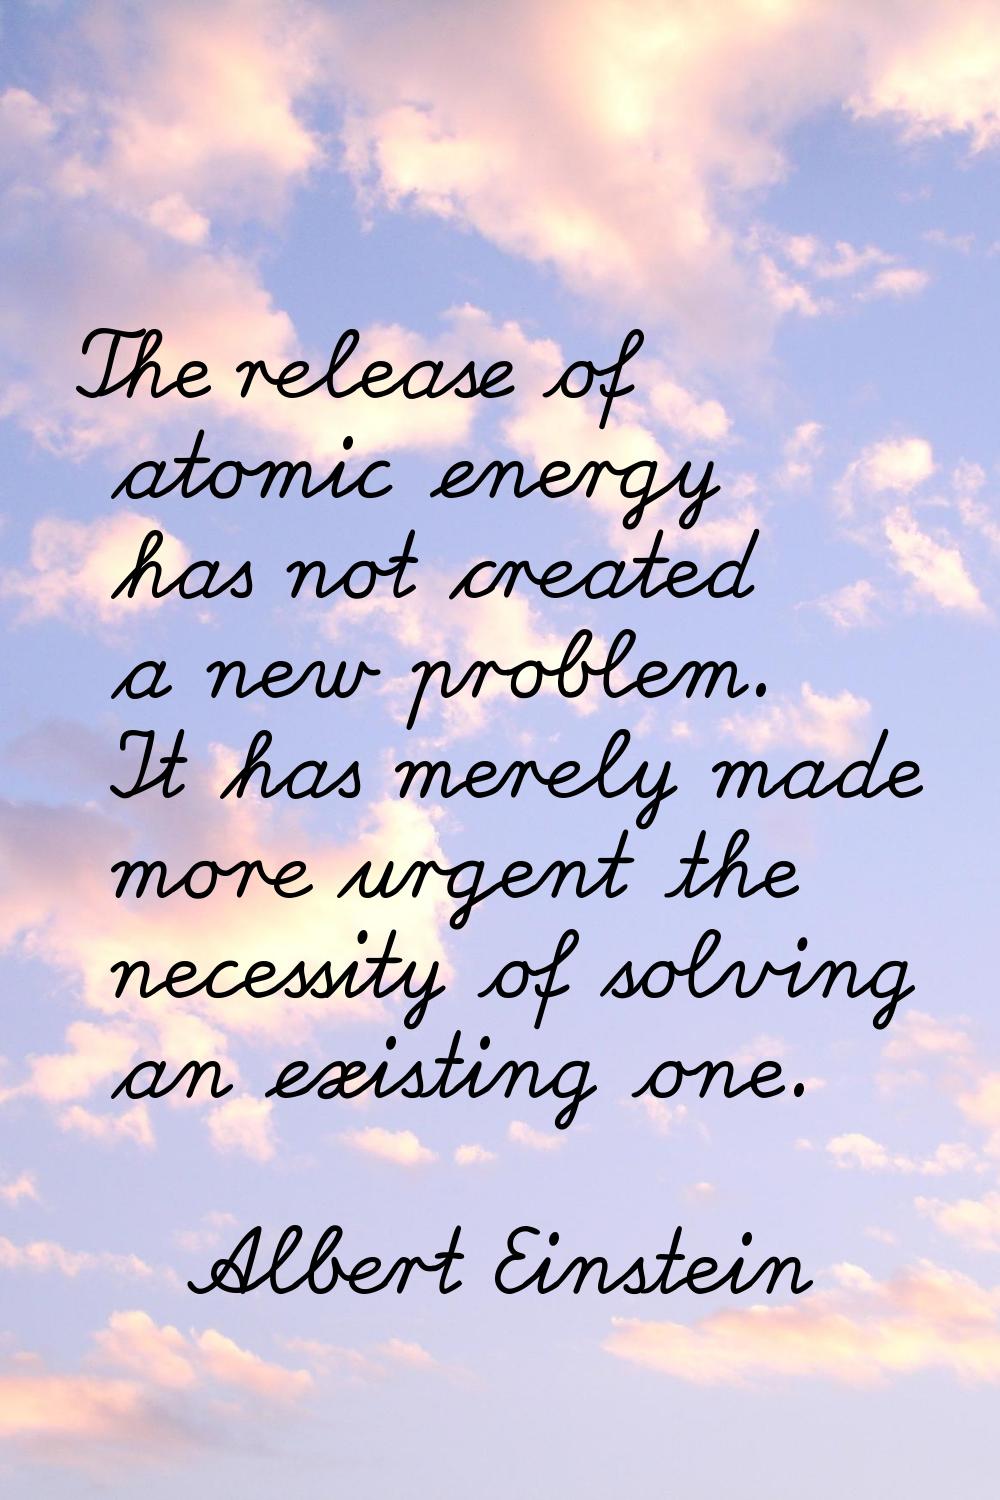 The release of atomic energy has not created a new problem. It has merely made more urgent the nece